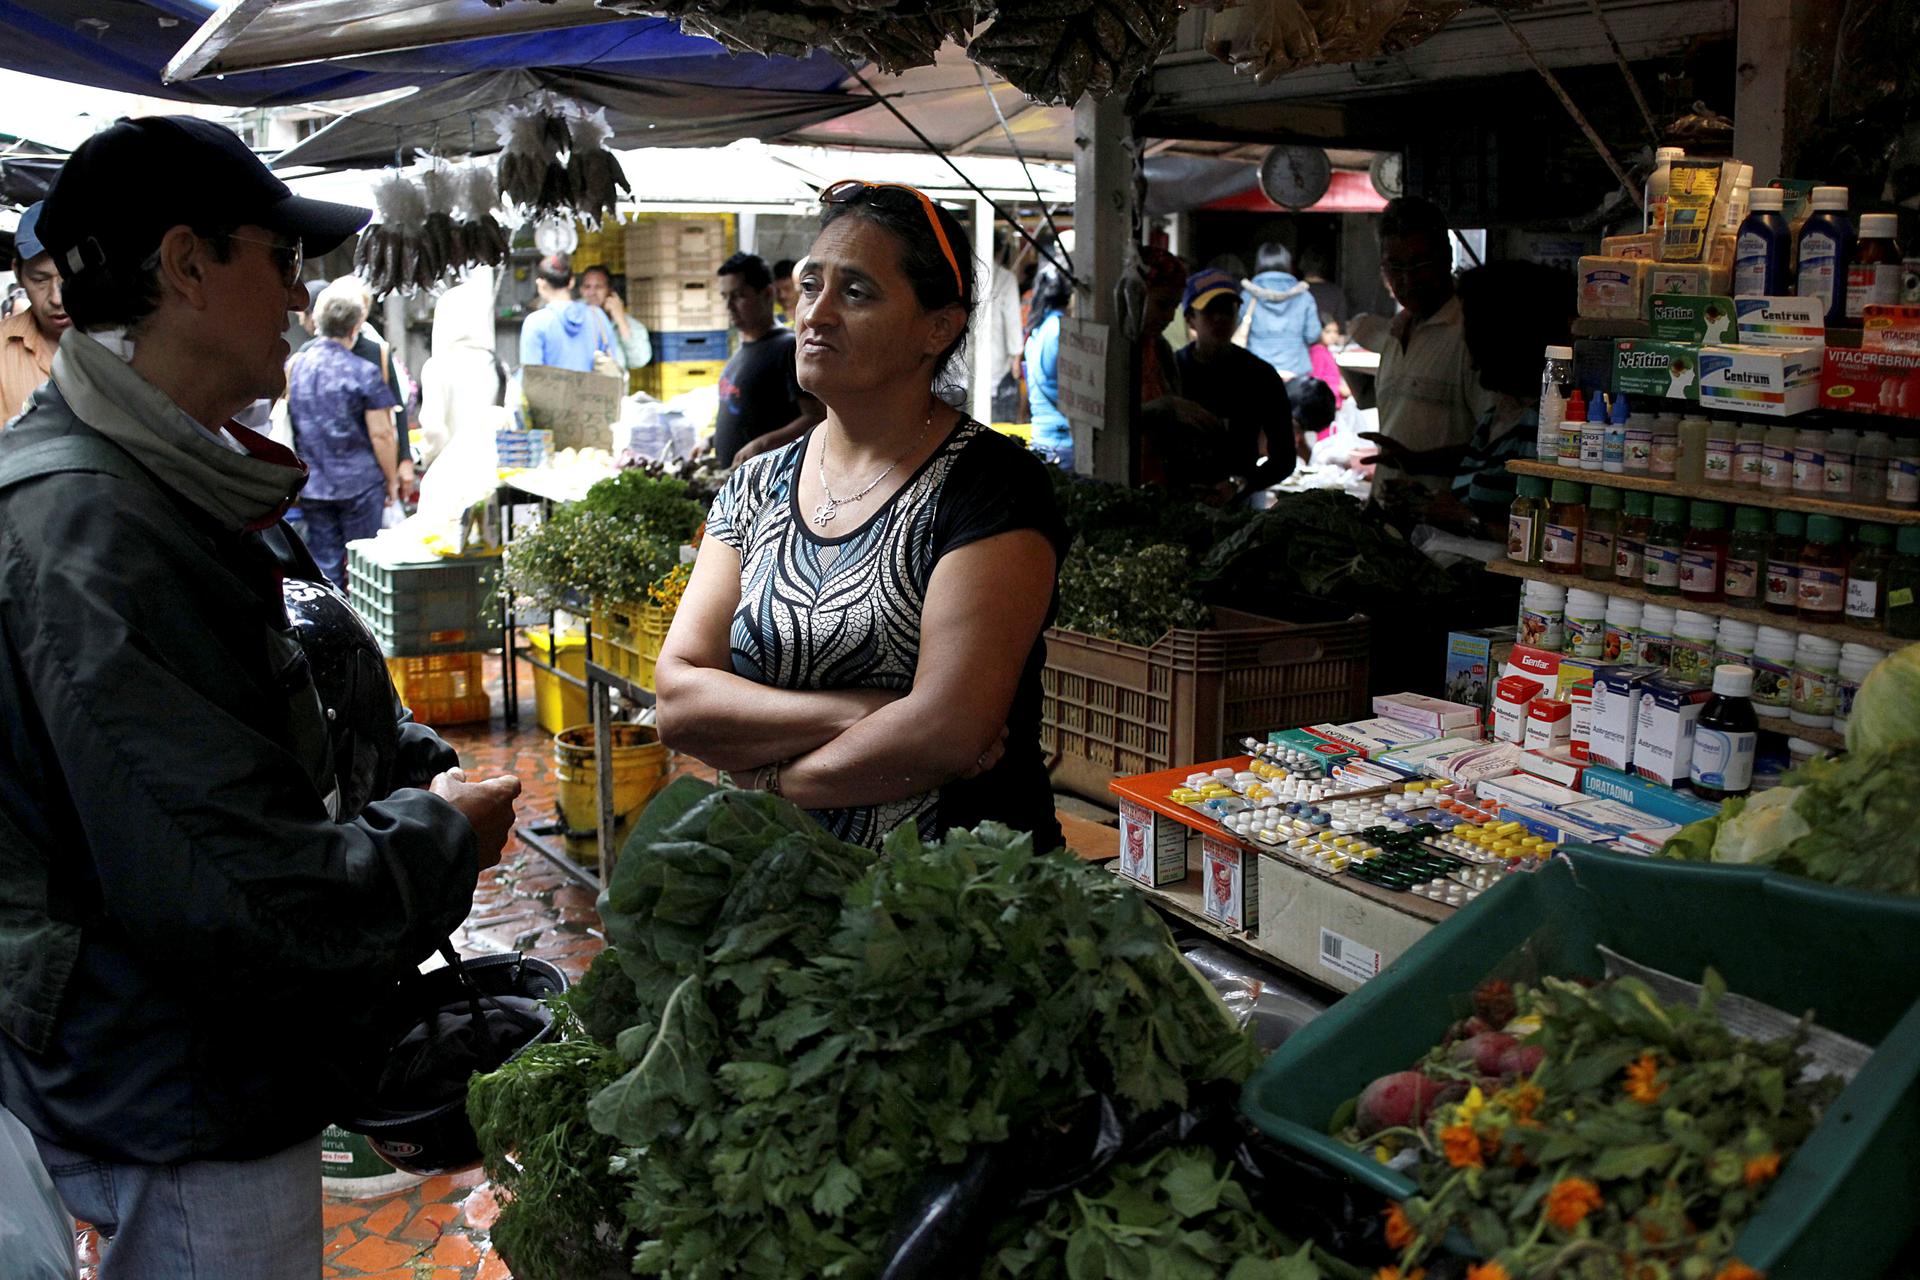 A vendor talks with a customer in her fruit and vegetables stall selling medicines at a market in Rubio, Venezuela.